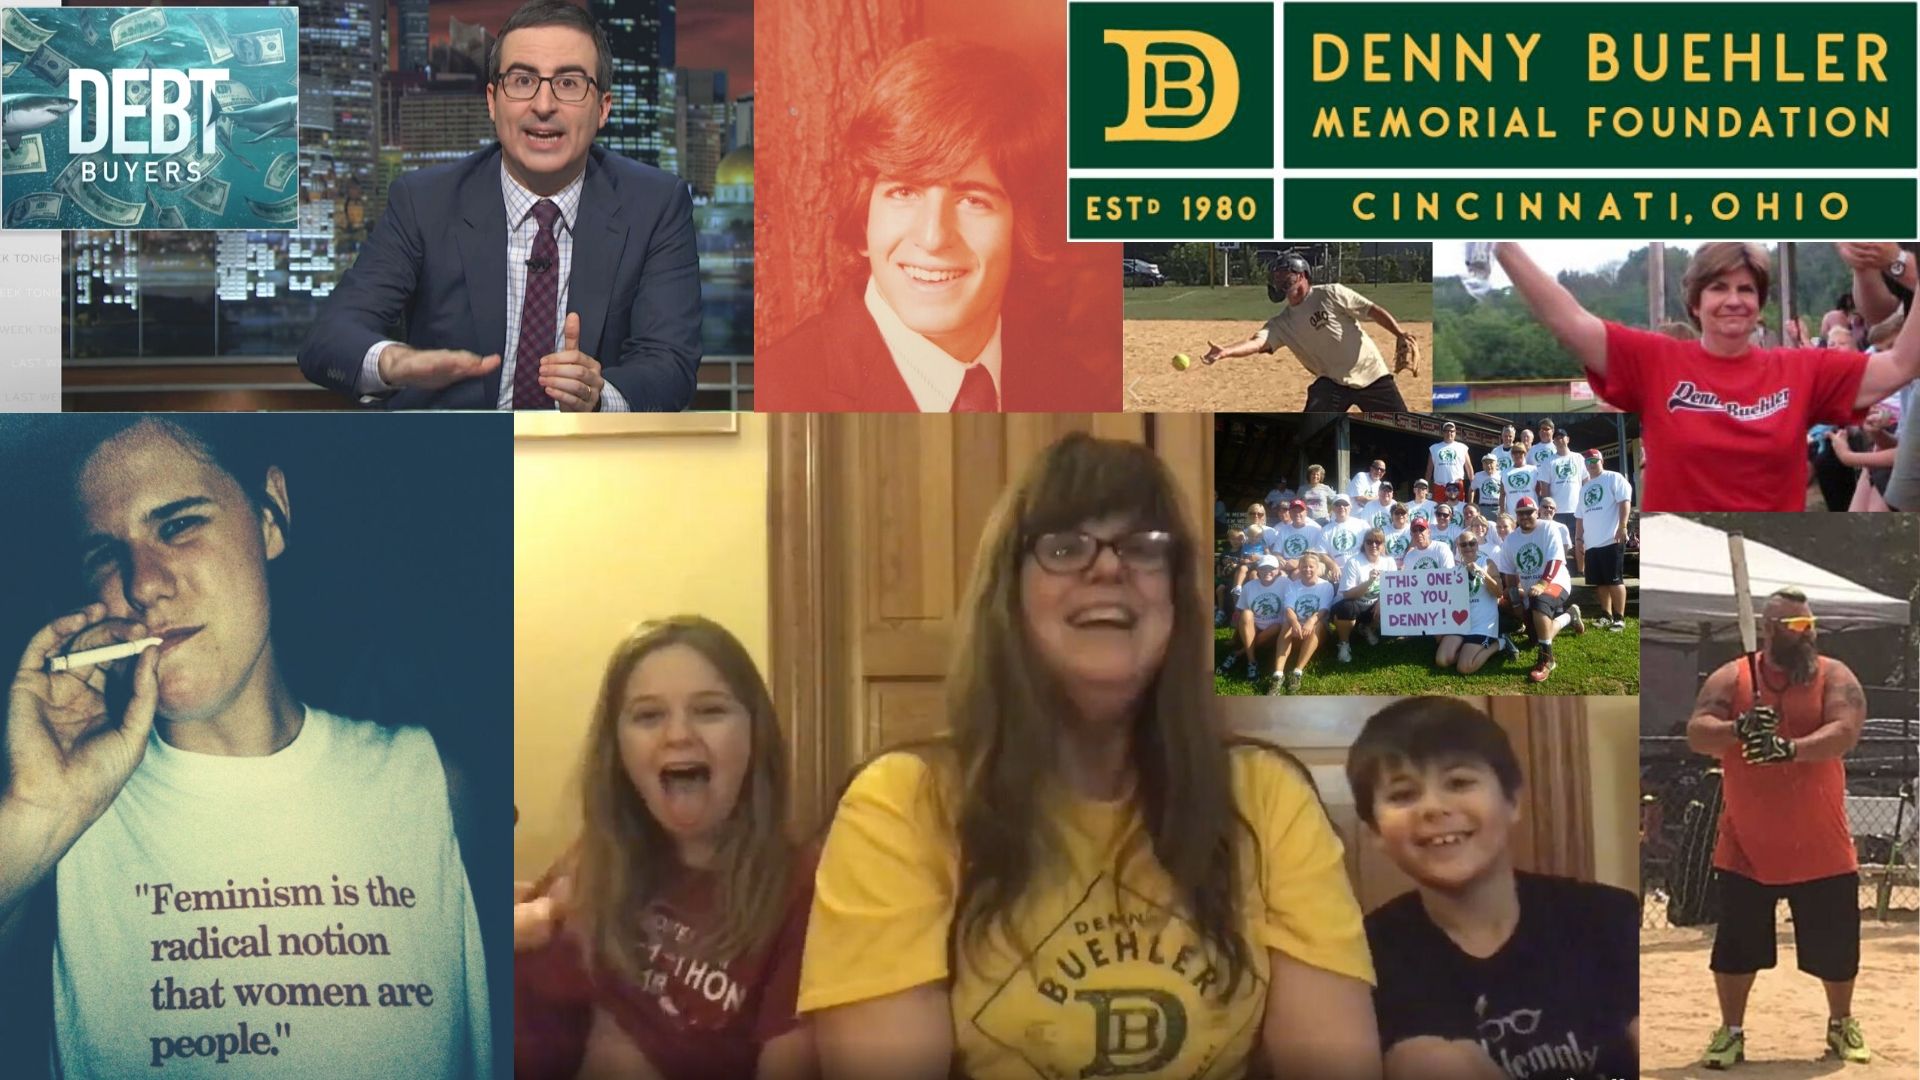 Collage of photos relating to the Denny Buehler Memorial Foundation